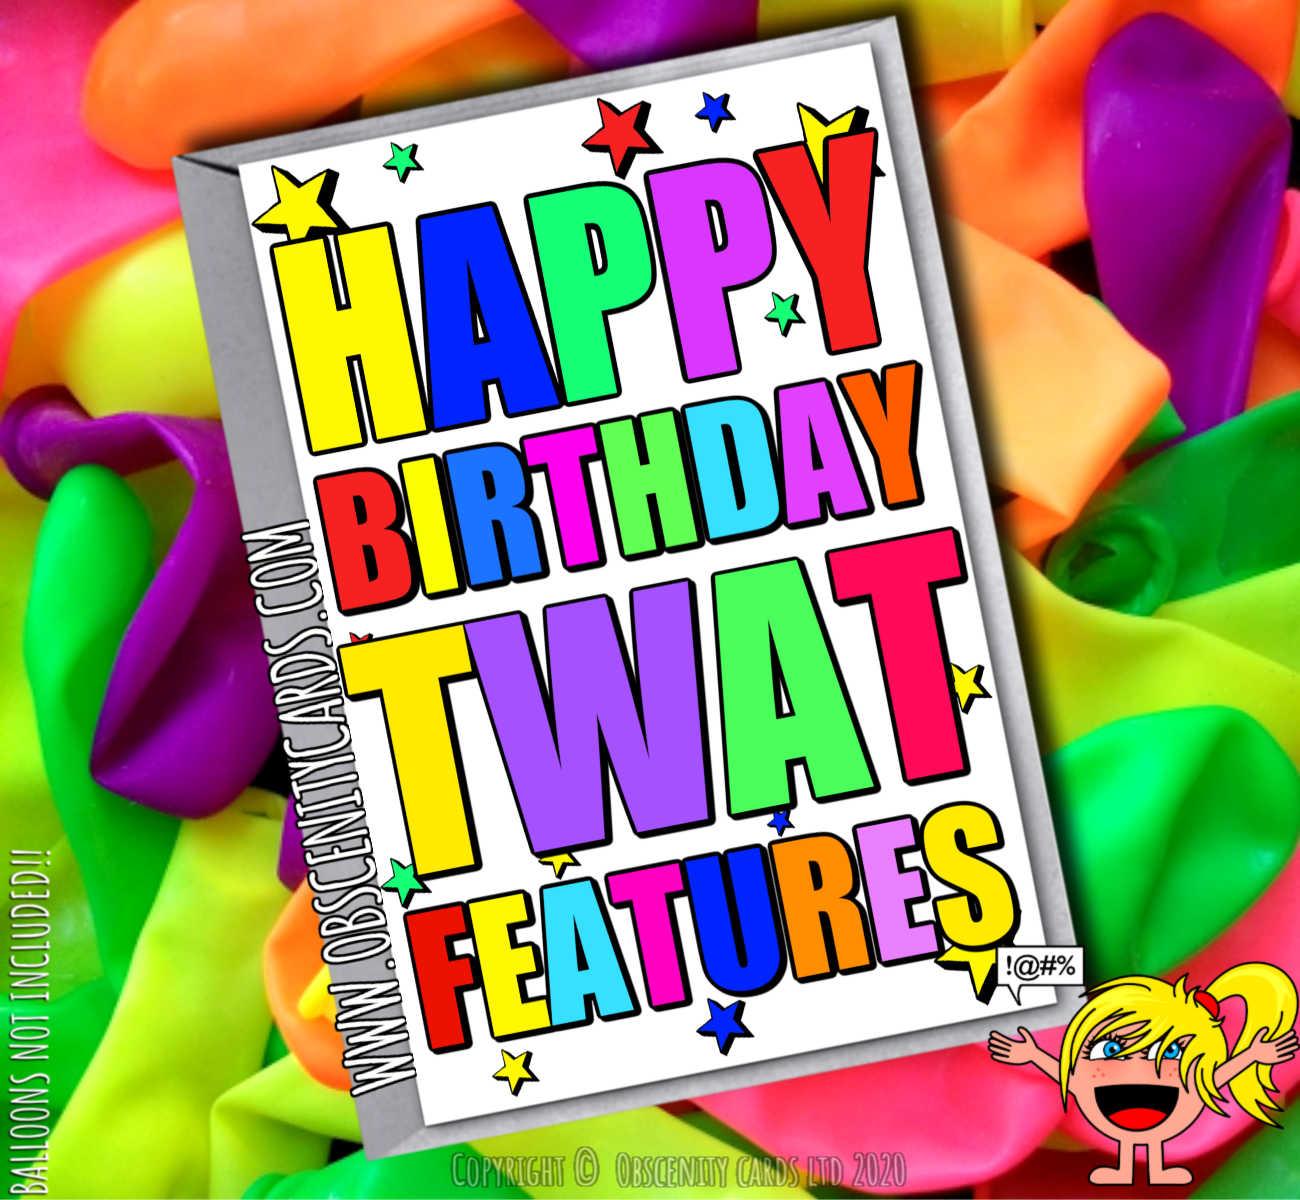 HAPPY BIRTHDAY TWAT FEATURES FUNNY CARD